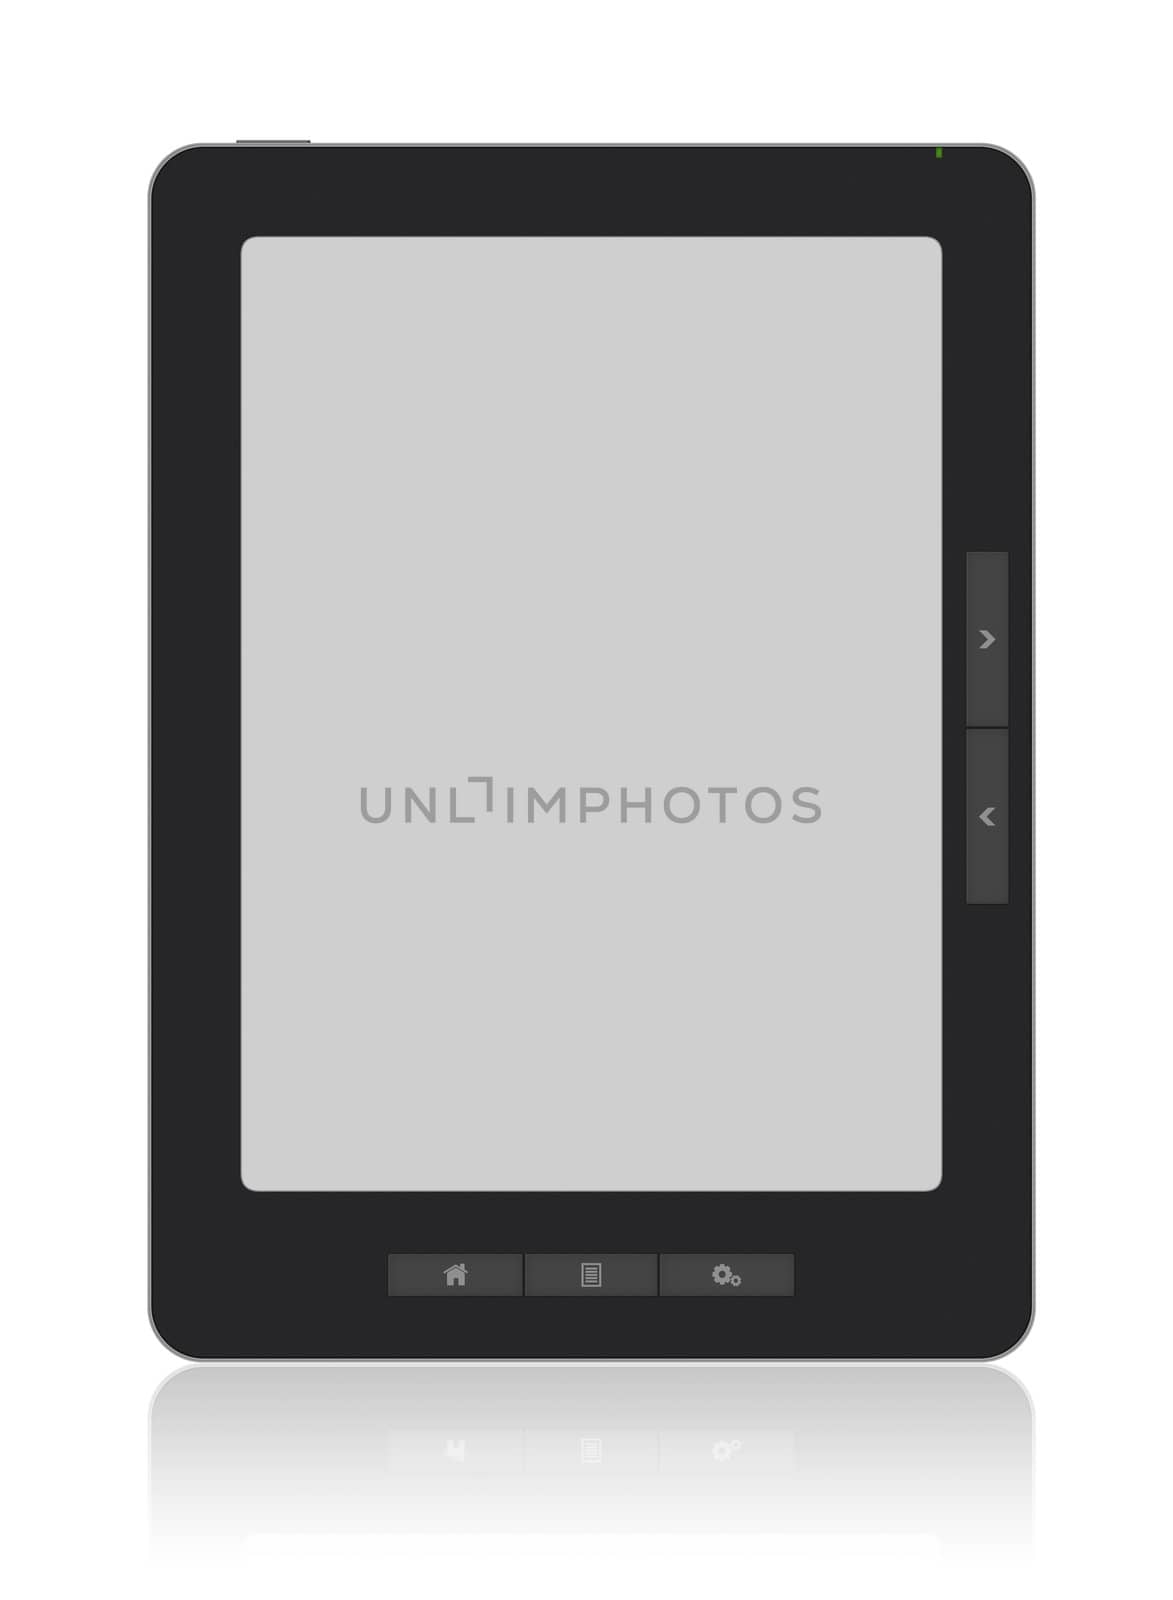 Portable e-book reader of my own design with two clipping path for book and screen. You may add your own text or picture. XXXL size, ultra quality. Isolated on white.